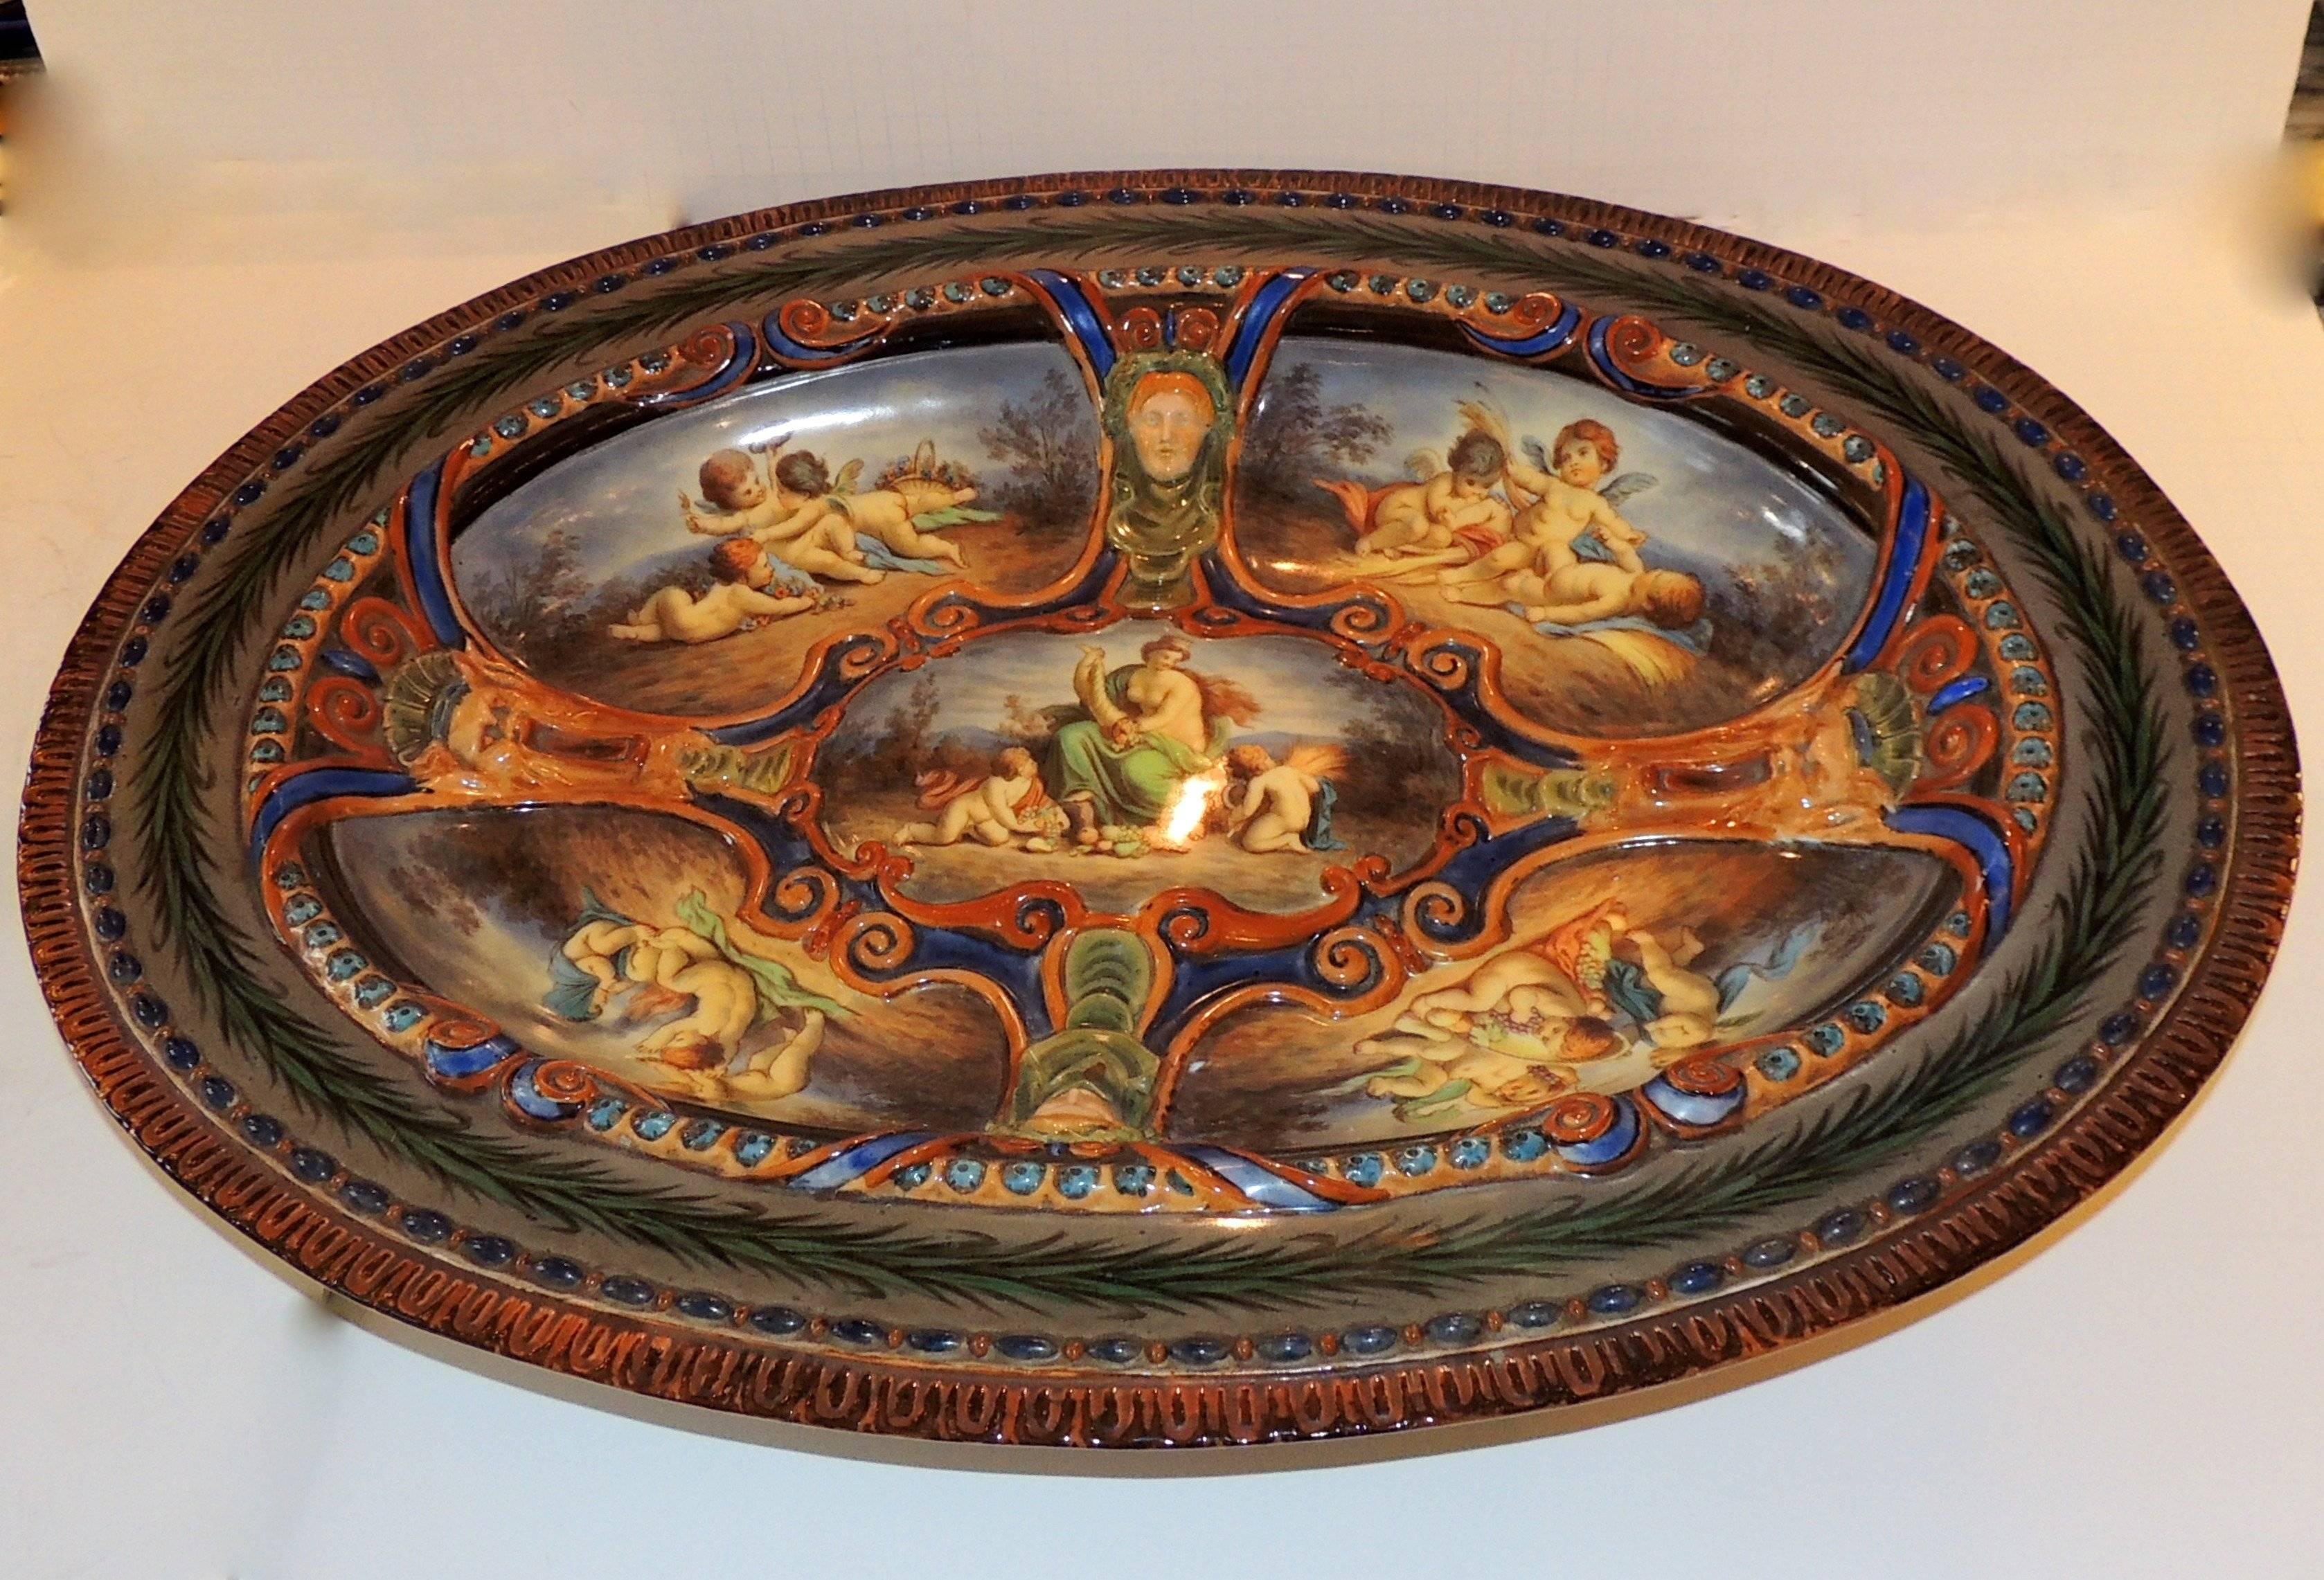 A wonderful and very fine presentation KPM monumental hand painted German Berlin porcelain oval centerpiece platter with five scenes adorned with cherub’s female and male masks.
Very rare!